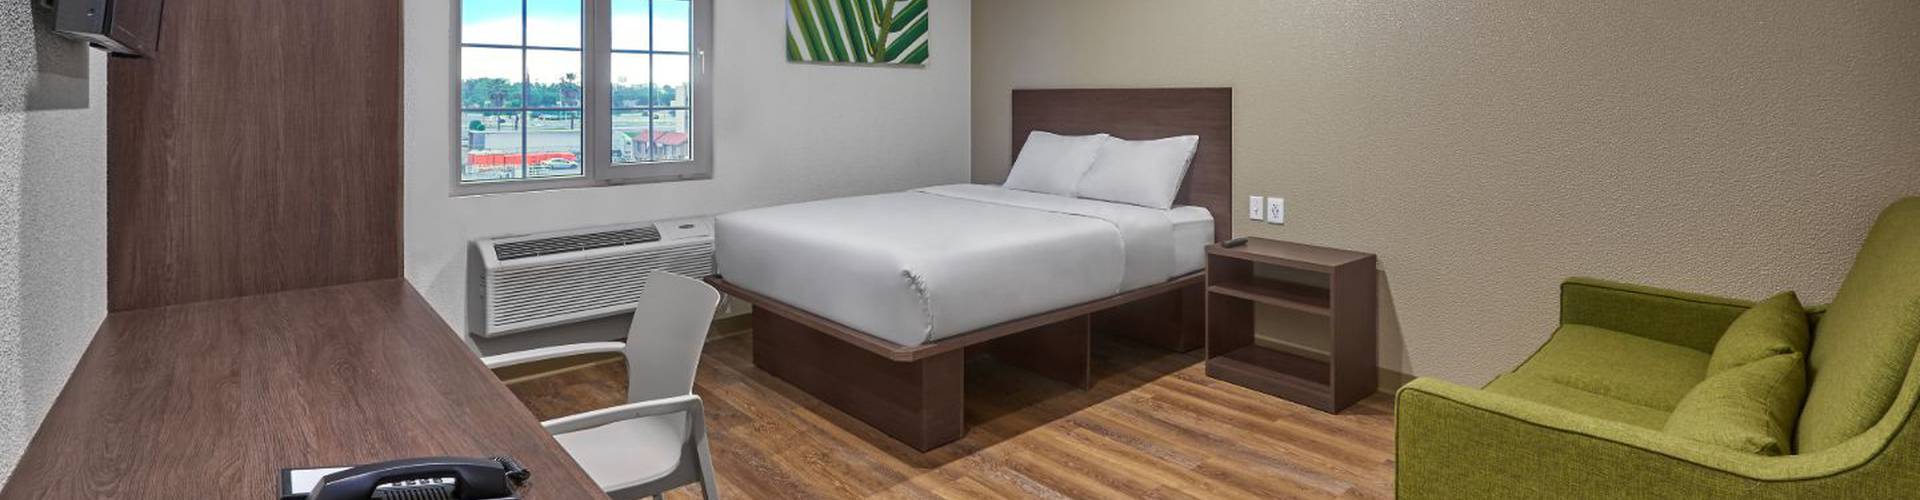 EXTENDED SUITES - Mexicali - 